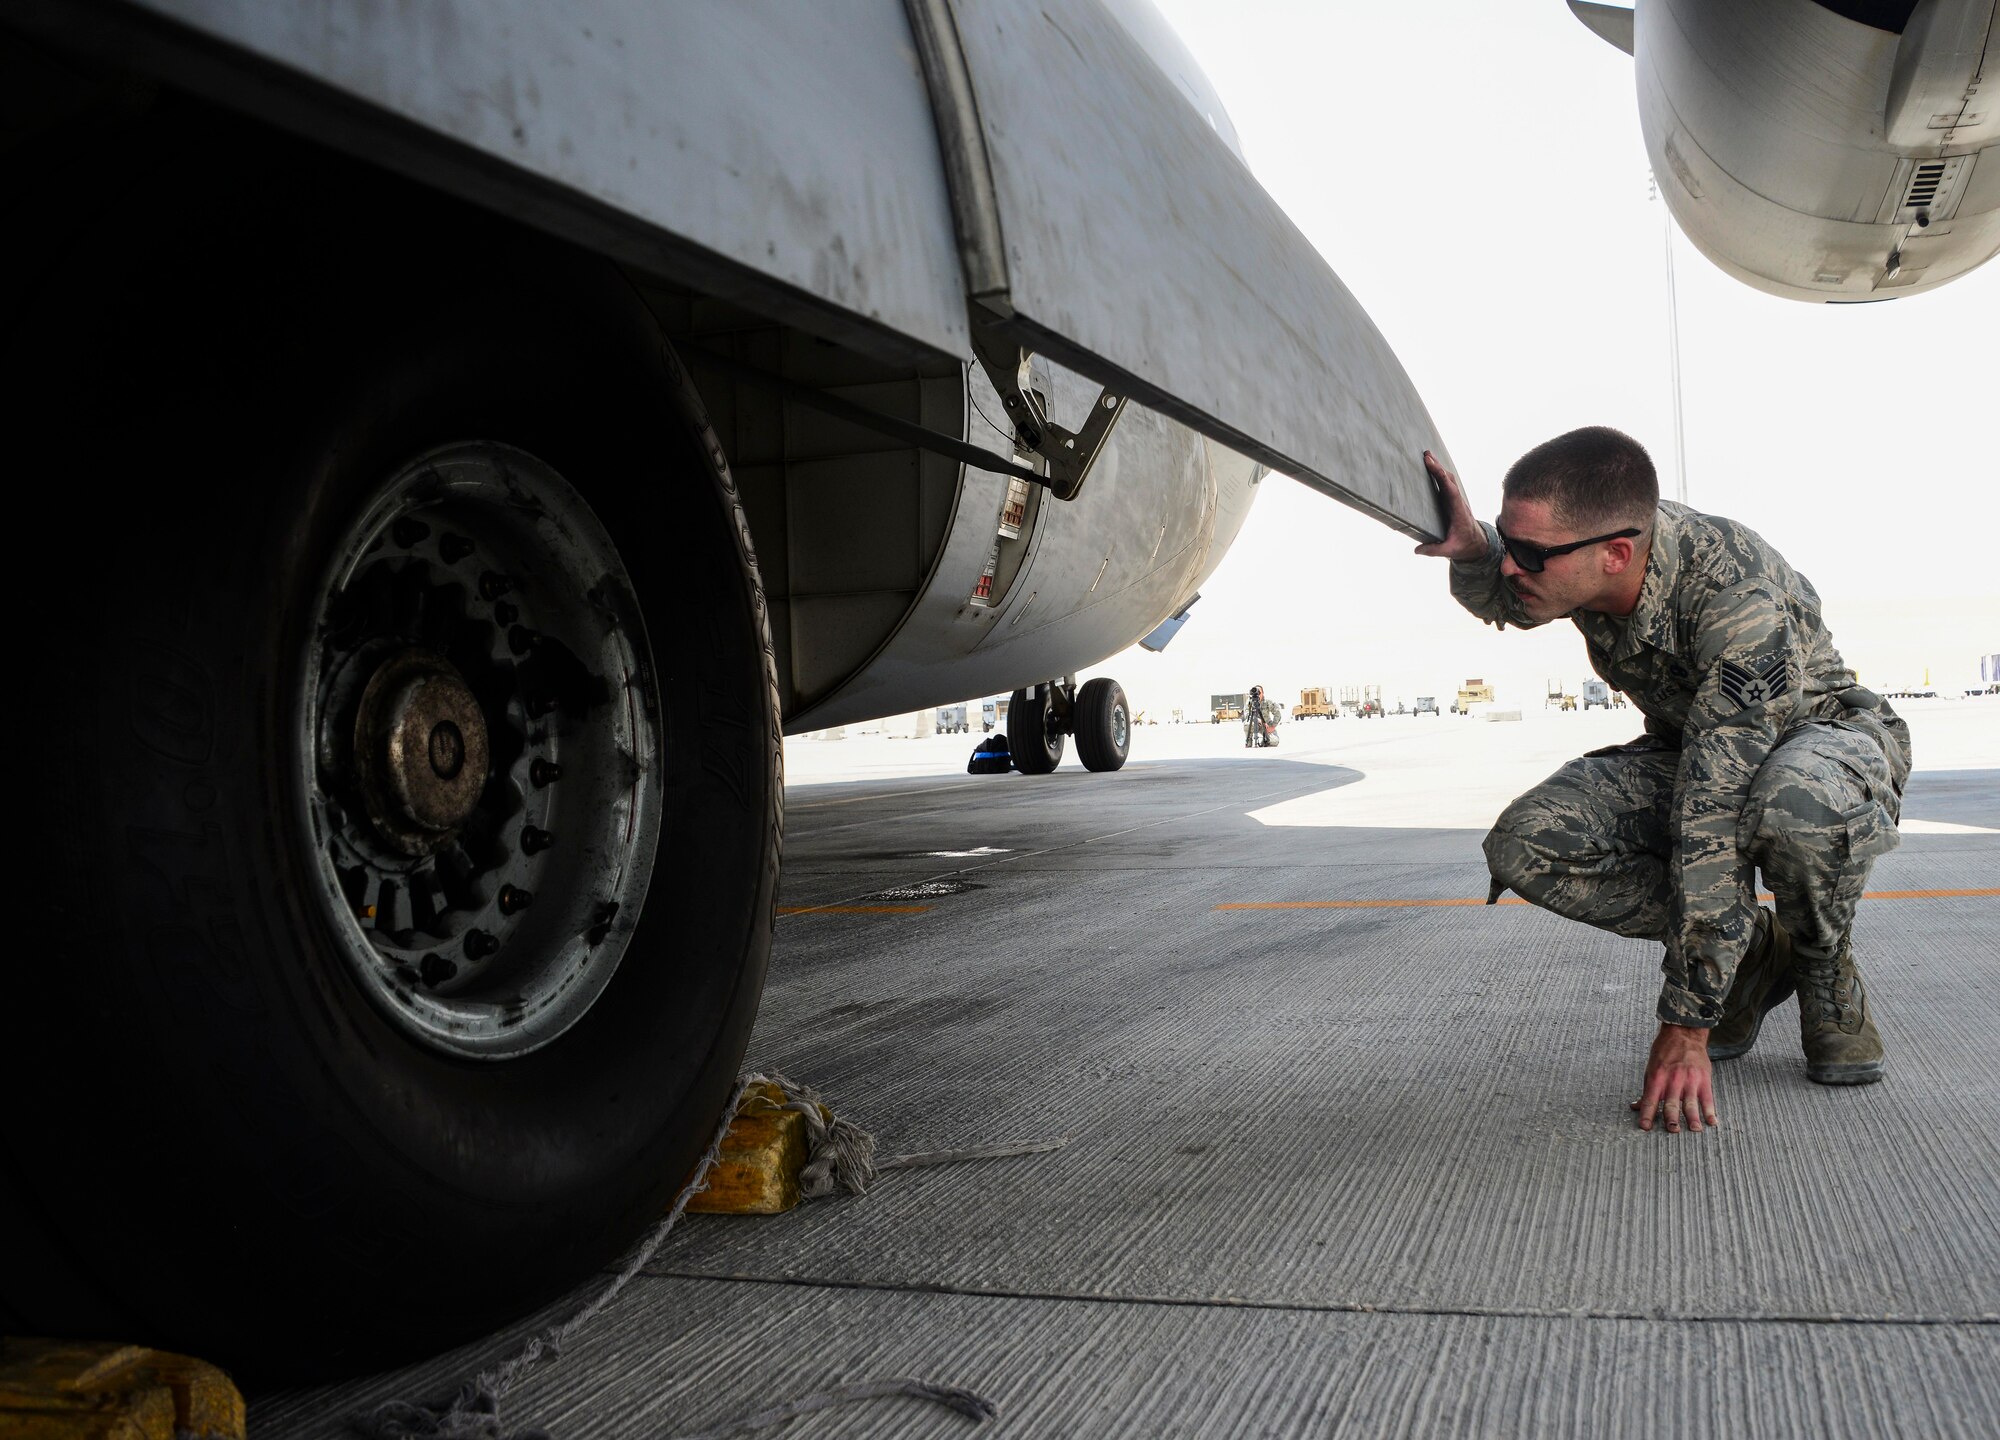 Staff Sgt. Josh Budinich, 8th Expeditionary Air Mobility Squadron, Aircraft Maintenance flight aero repair craftsman, inspects the tires of a C-17 Globemaster III during a preflight inspection June 30, 2016, at Al Udeid Air Base, Qatar. Budinich takes approximately three hours to inspect the whole aircraft, inside and out, from its tires and brakes to the oil in its engines. Due to the warm weather here, Airmen keep the aircraft at a constant temperature while operating on any of the systems on the aircraft to prevent additional issues from occurring. (U.S. Air Force photo/Senior Airman Janelle Patiño/Released)